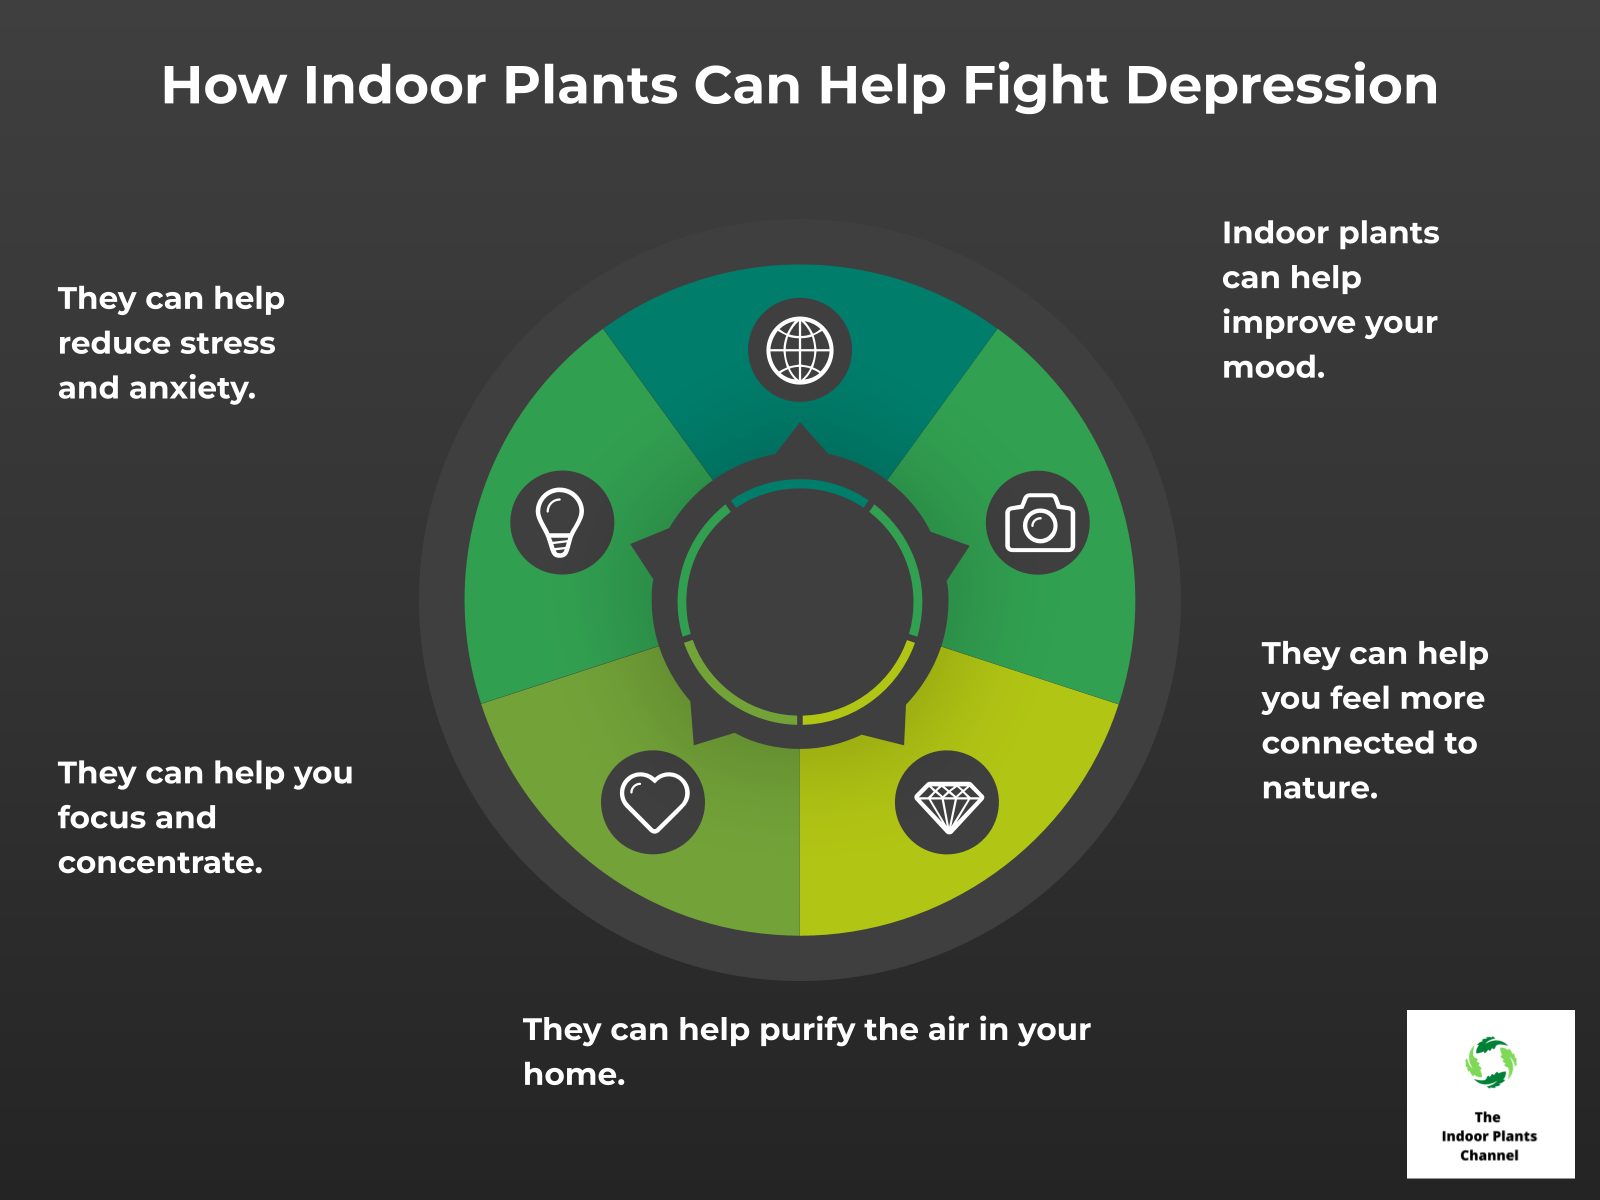 INFOGRAPHIC: How indoor plants can help fight depression